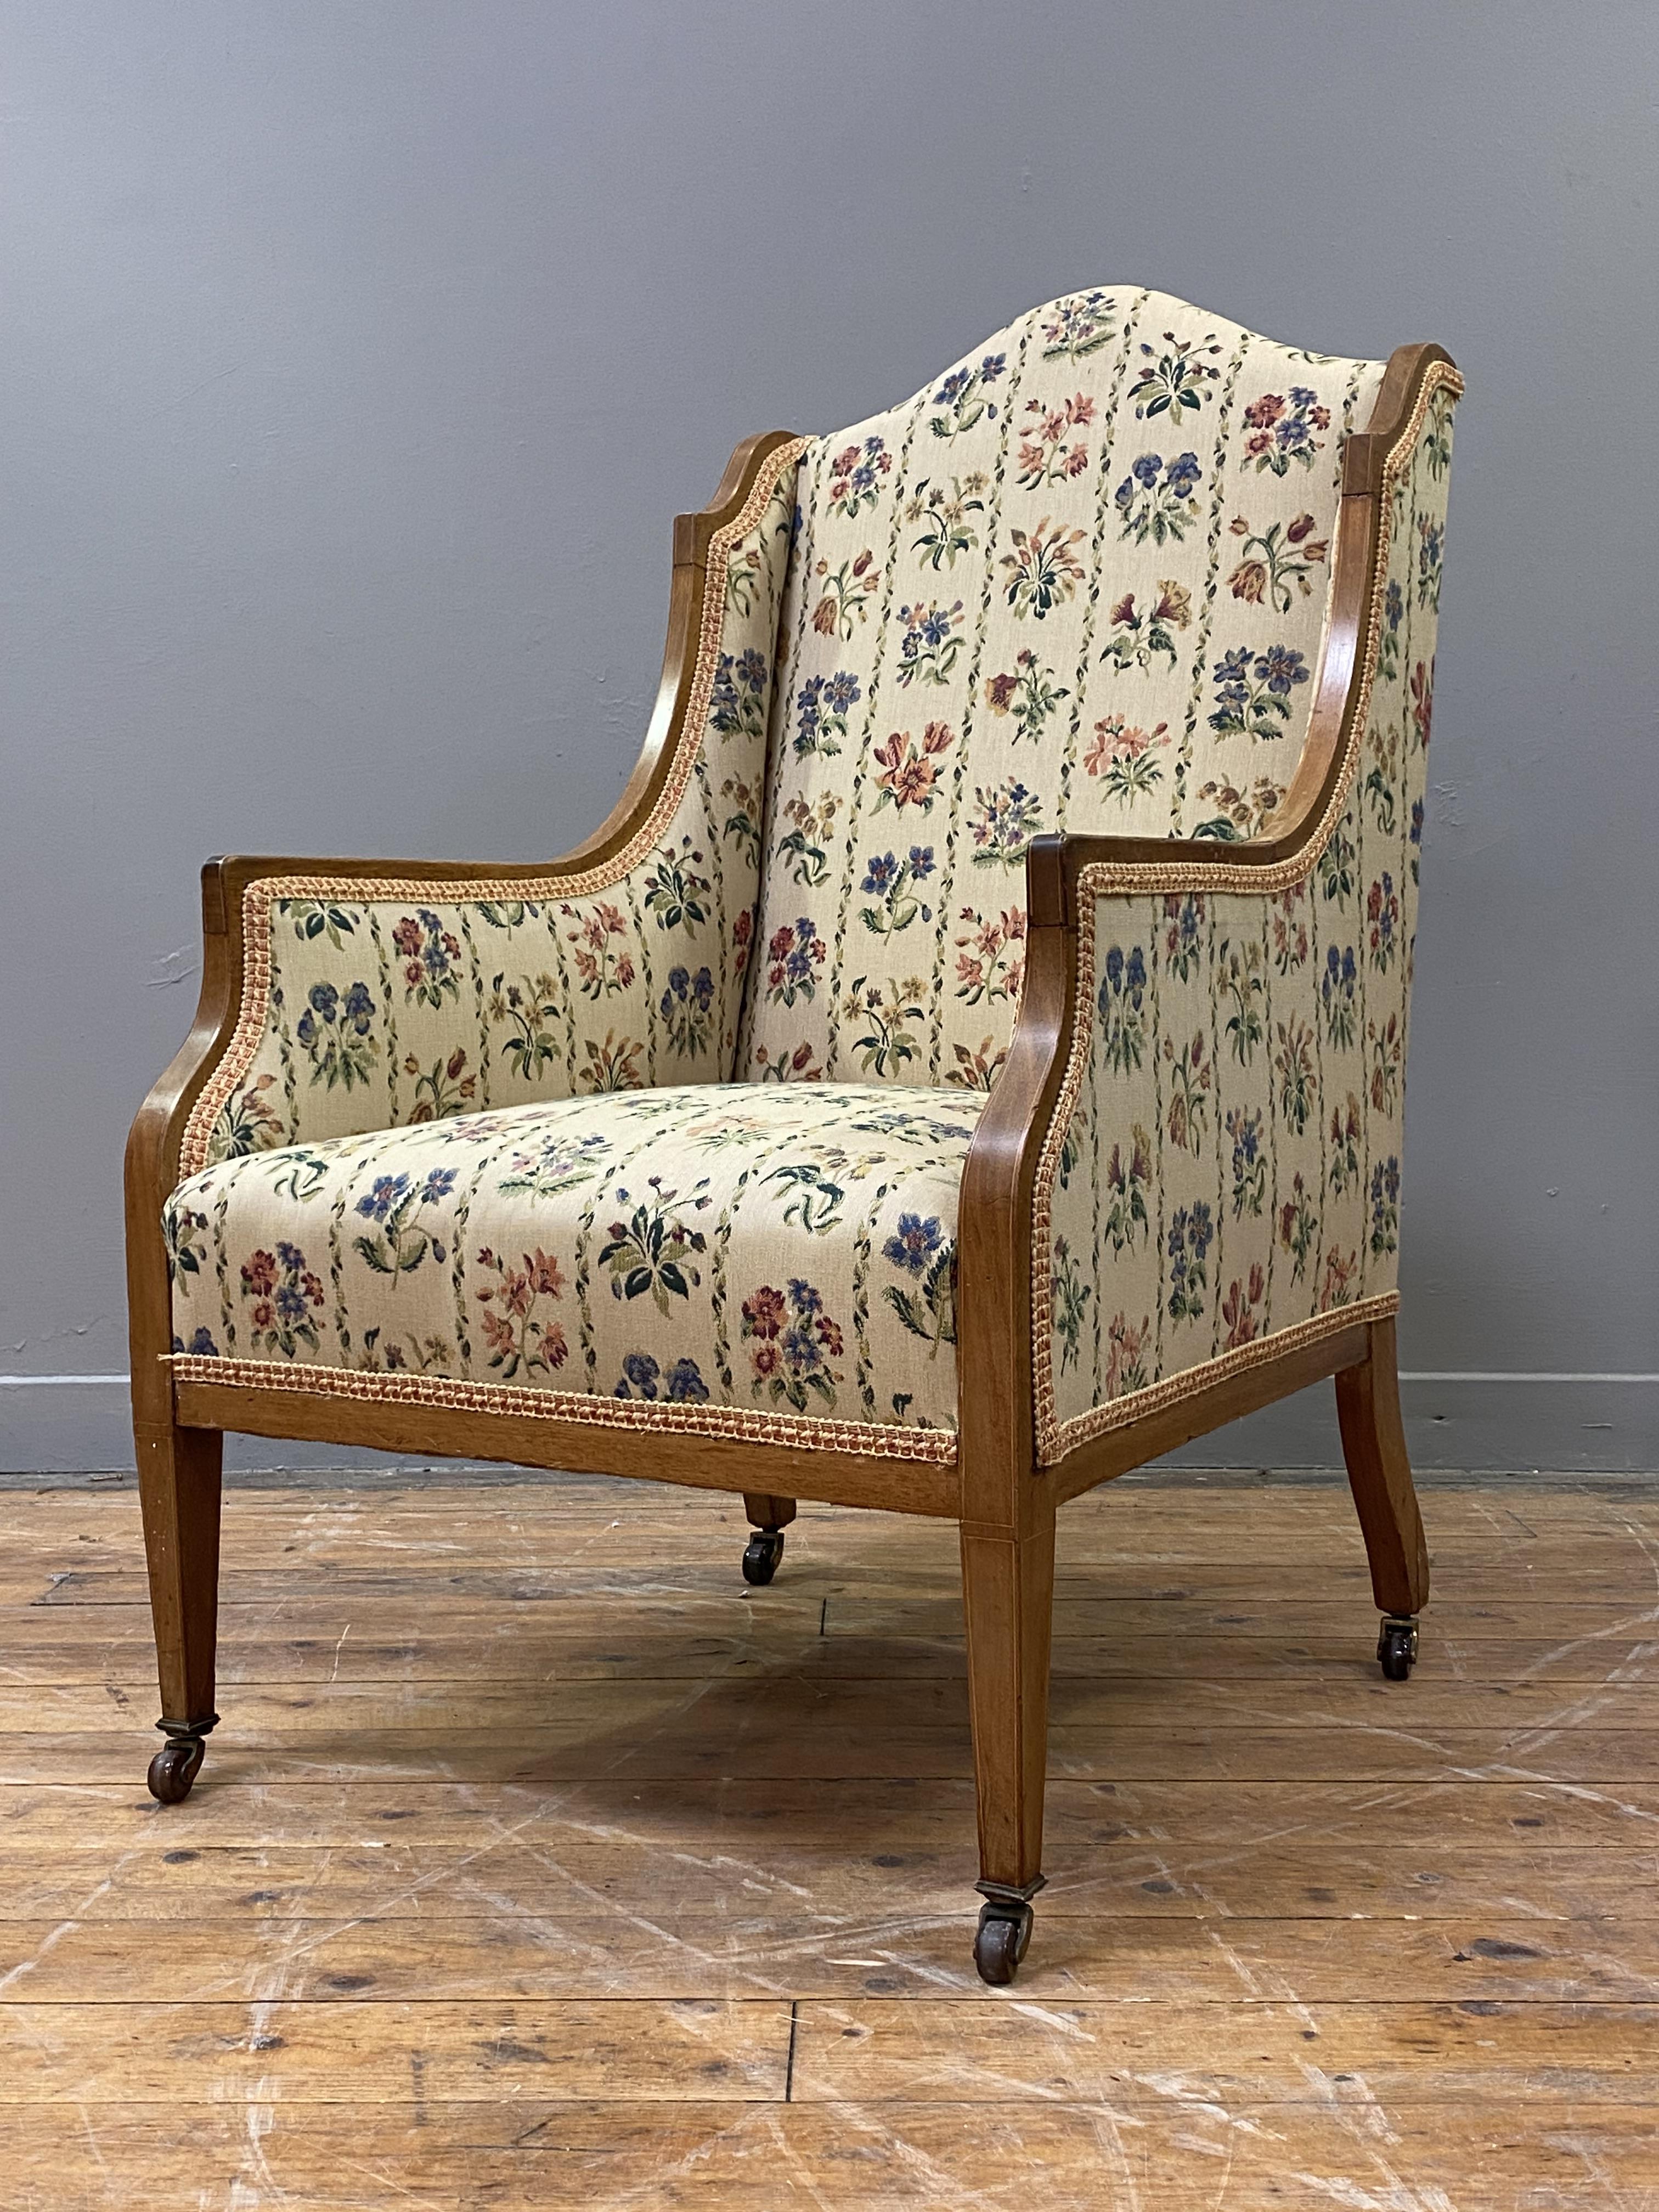 A Edwardian mahogany framed easy chair with upholstered panelled back, and arms, the show frame with